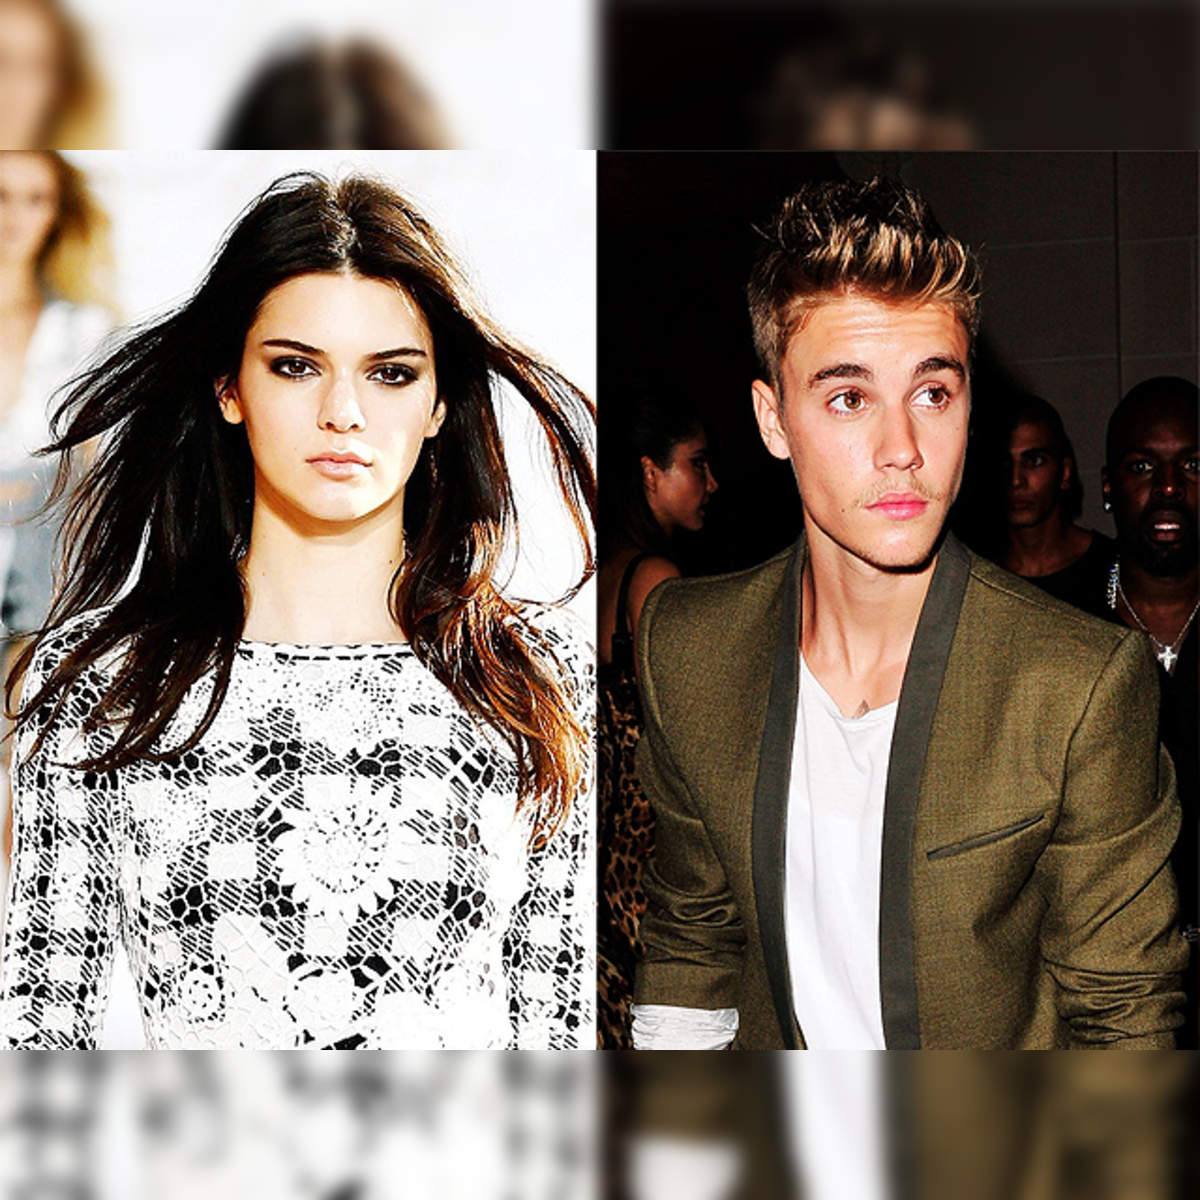 Kendall Jenner, Justin Bieber are just friends - The Economic Times